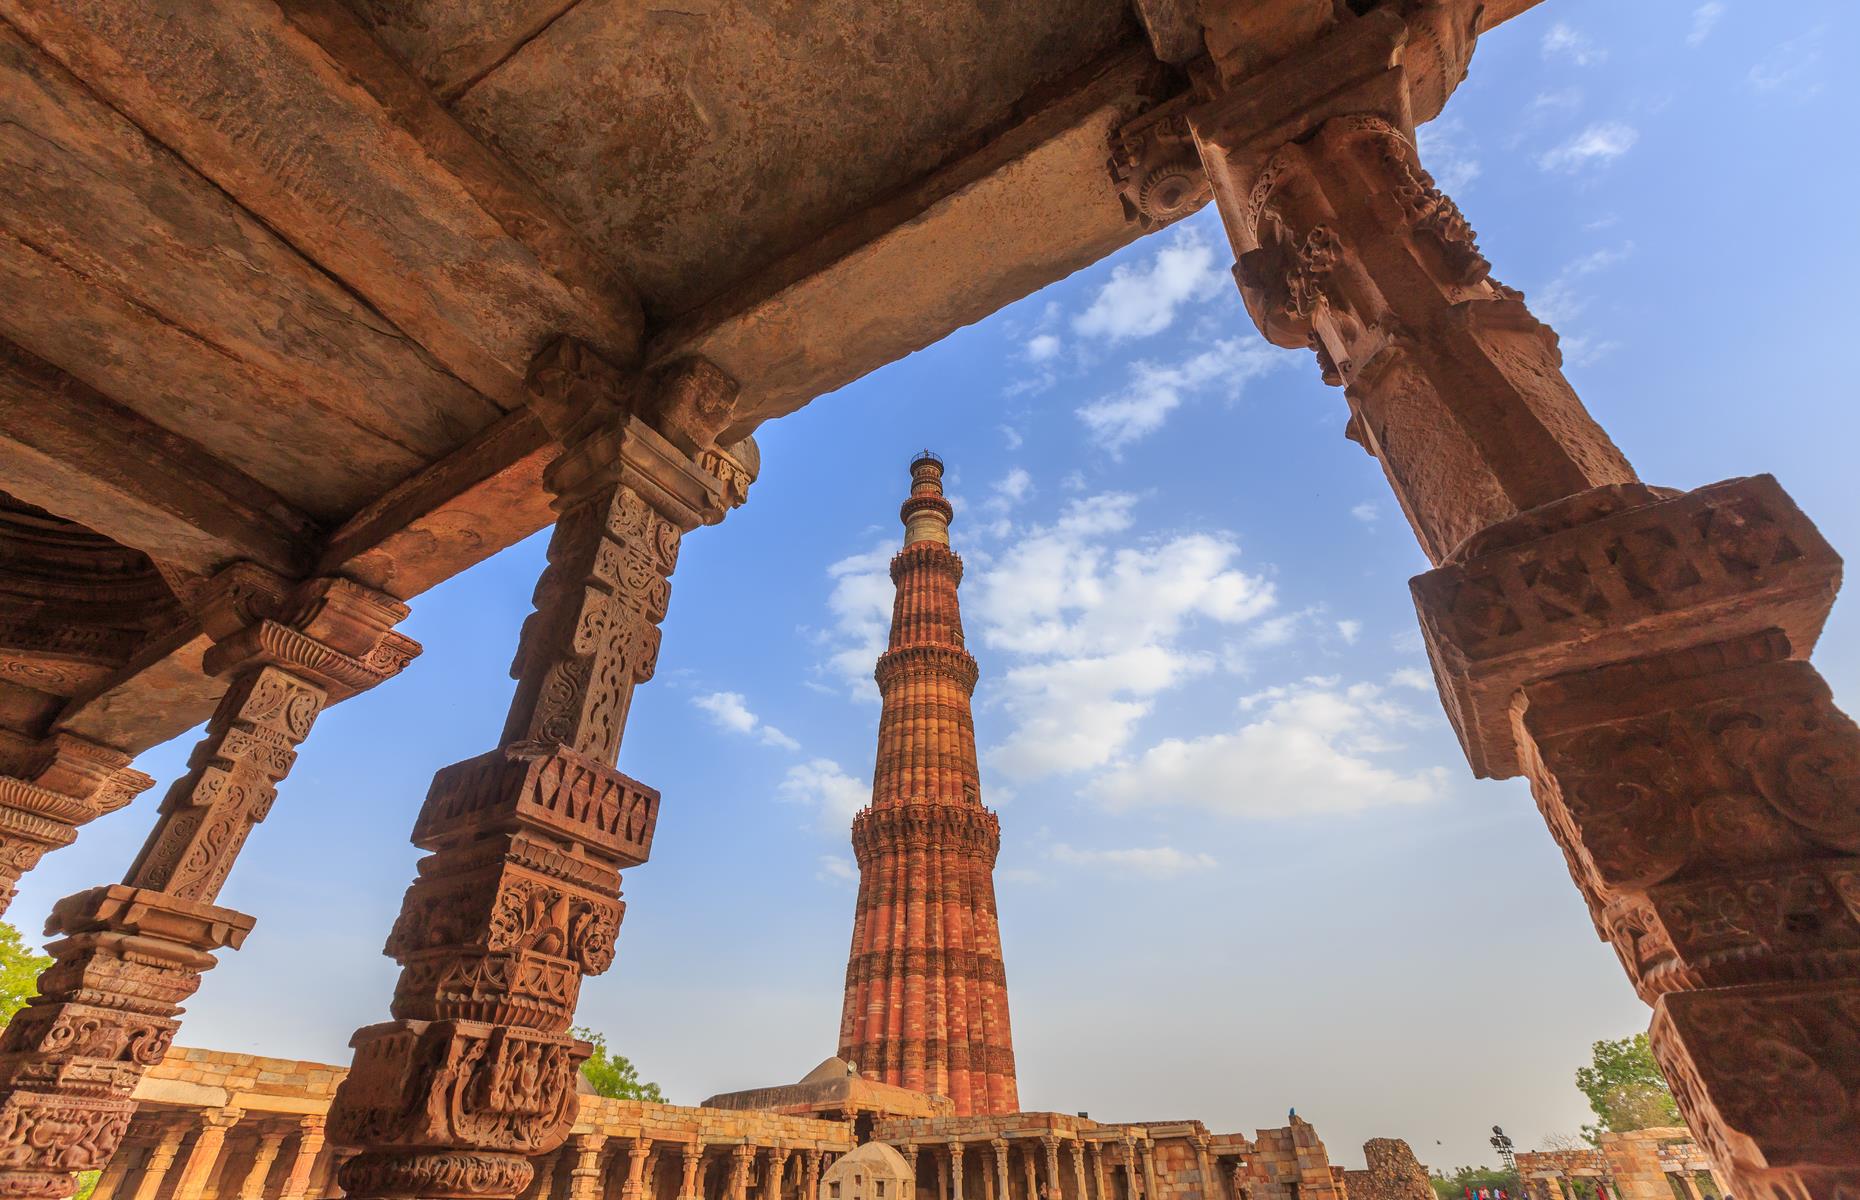 <p>Built in the late 12th century, Delhi’s red sandstone Qutub Minar is the tallest brick minaret in the world, standing at 238 feet. The mosque, a UNESCO World Heritage Site, is one of Delhi’s most impressive highlights, towering over the densely-populated capital in all its chaotic beauty.</p>